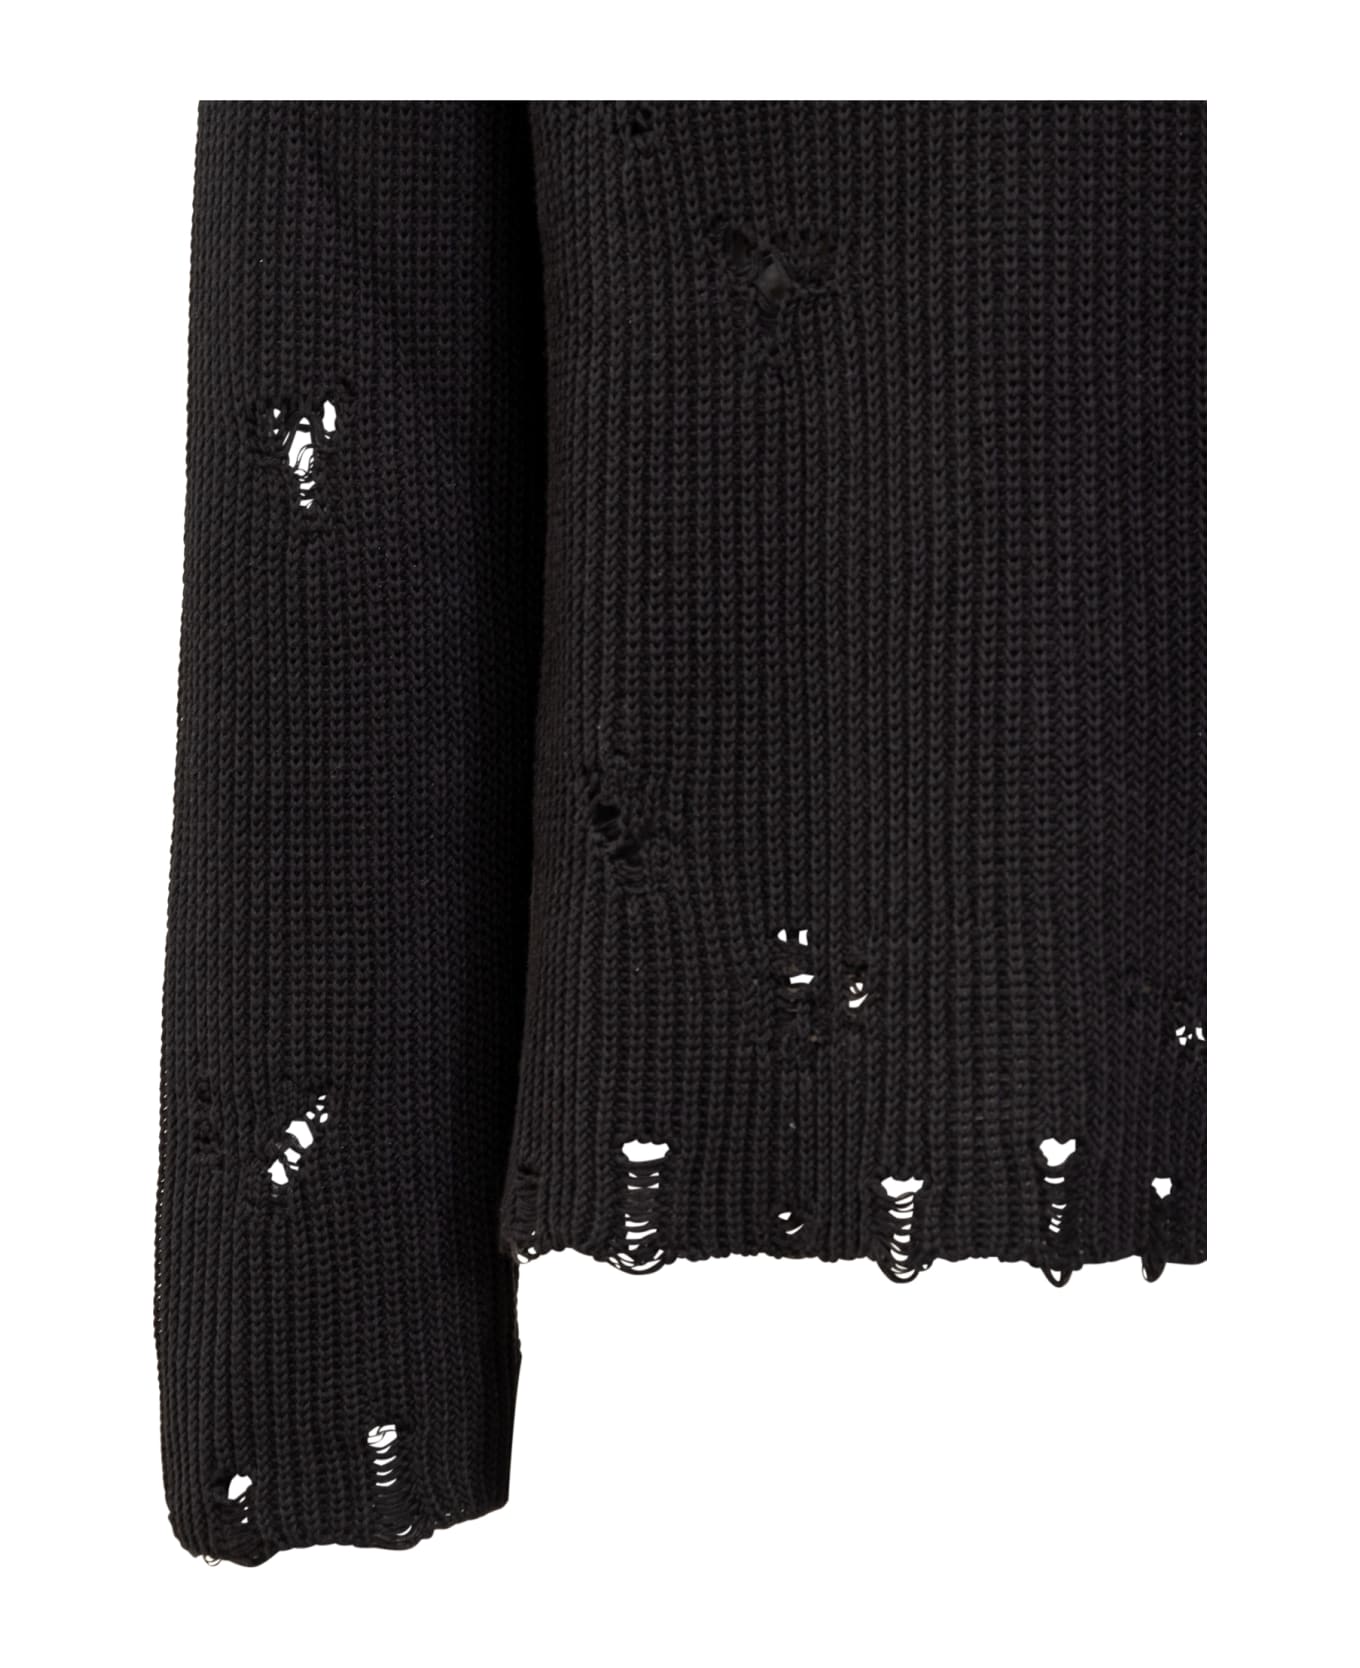 A Paper Kid Distressed Effect Sweater - Black